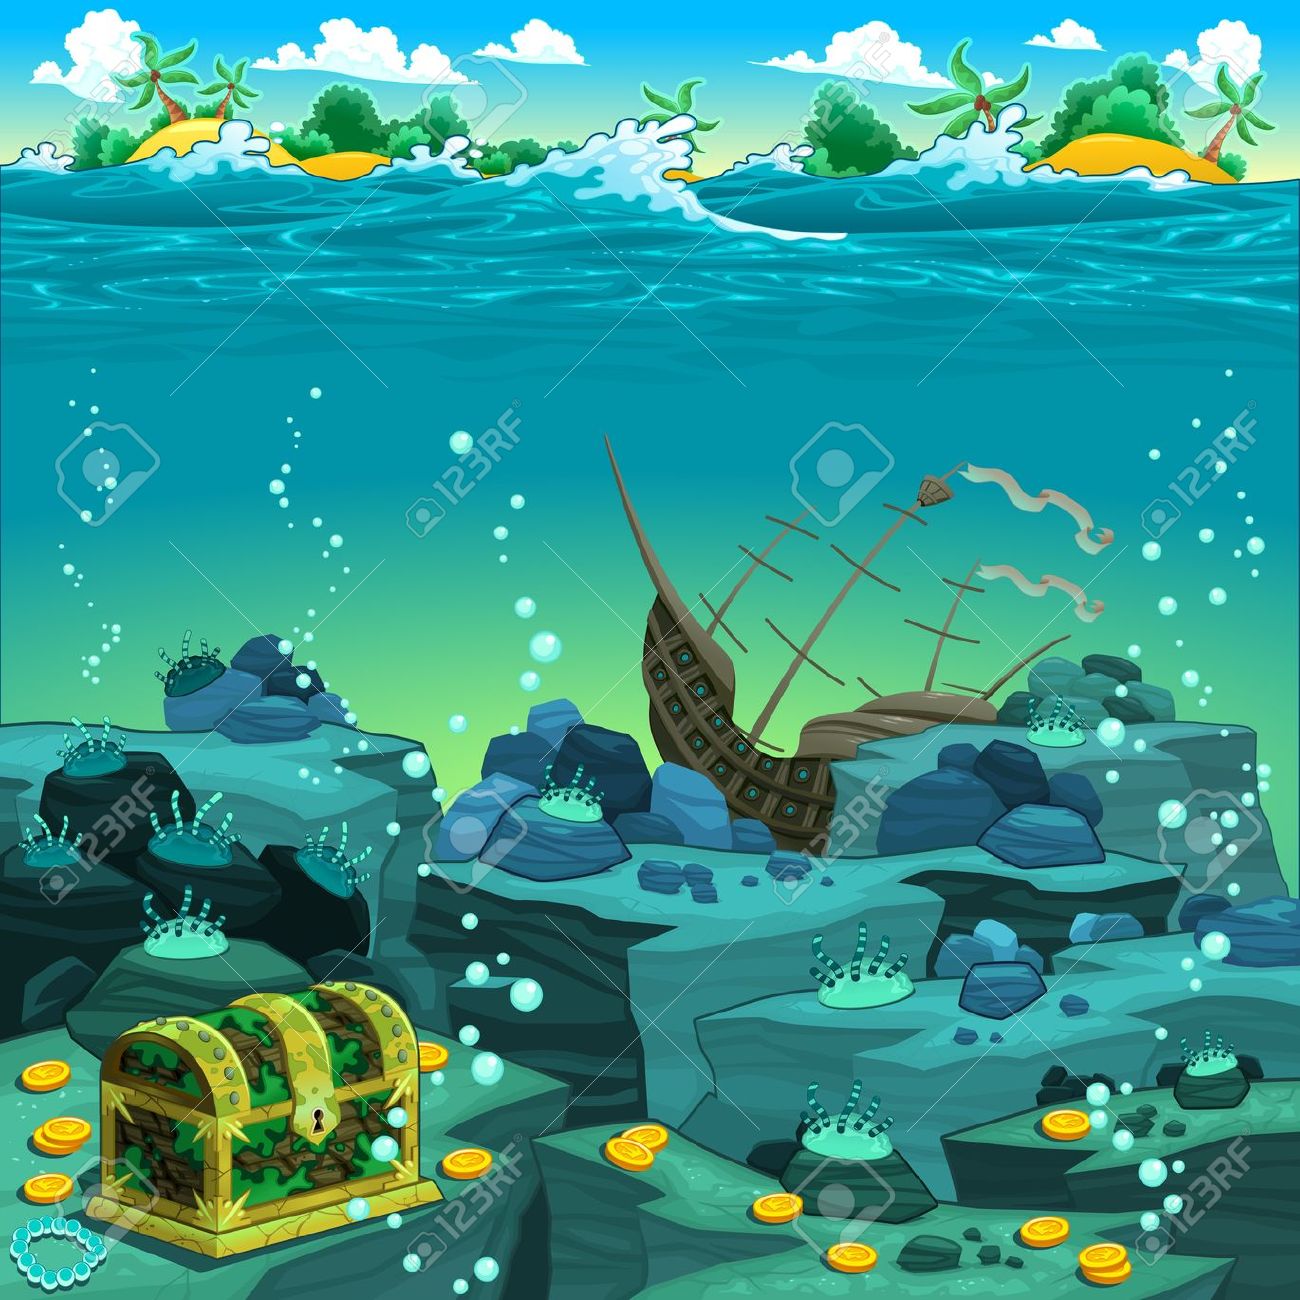 Seascape clipart #12, Download drawings